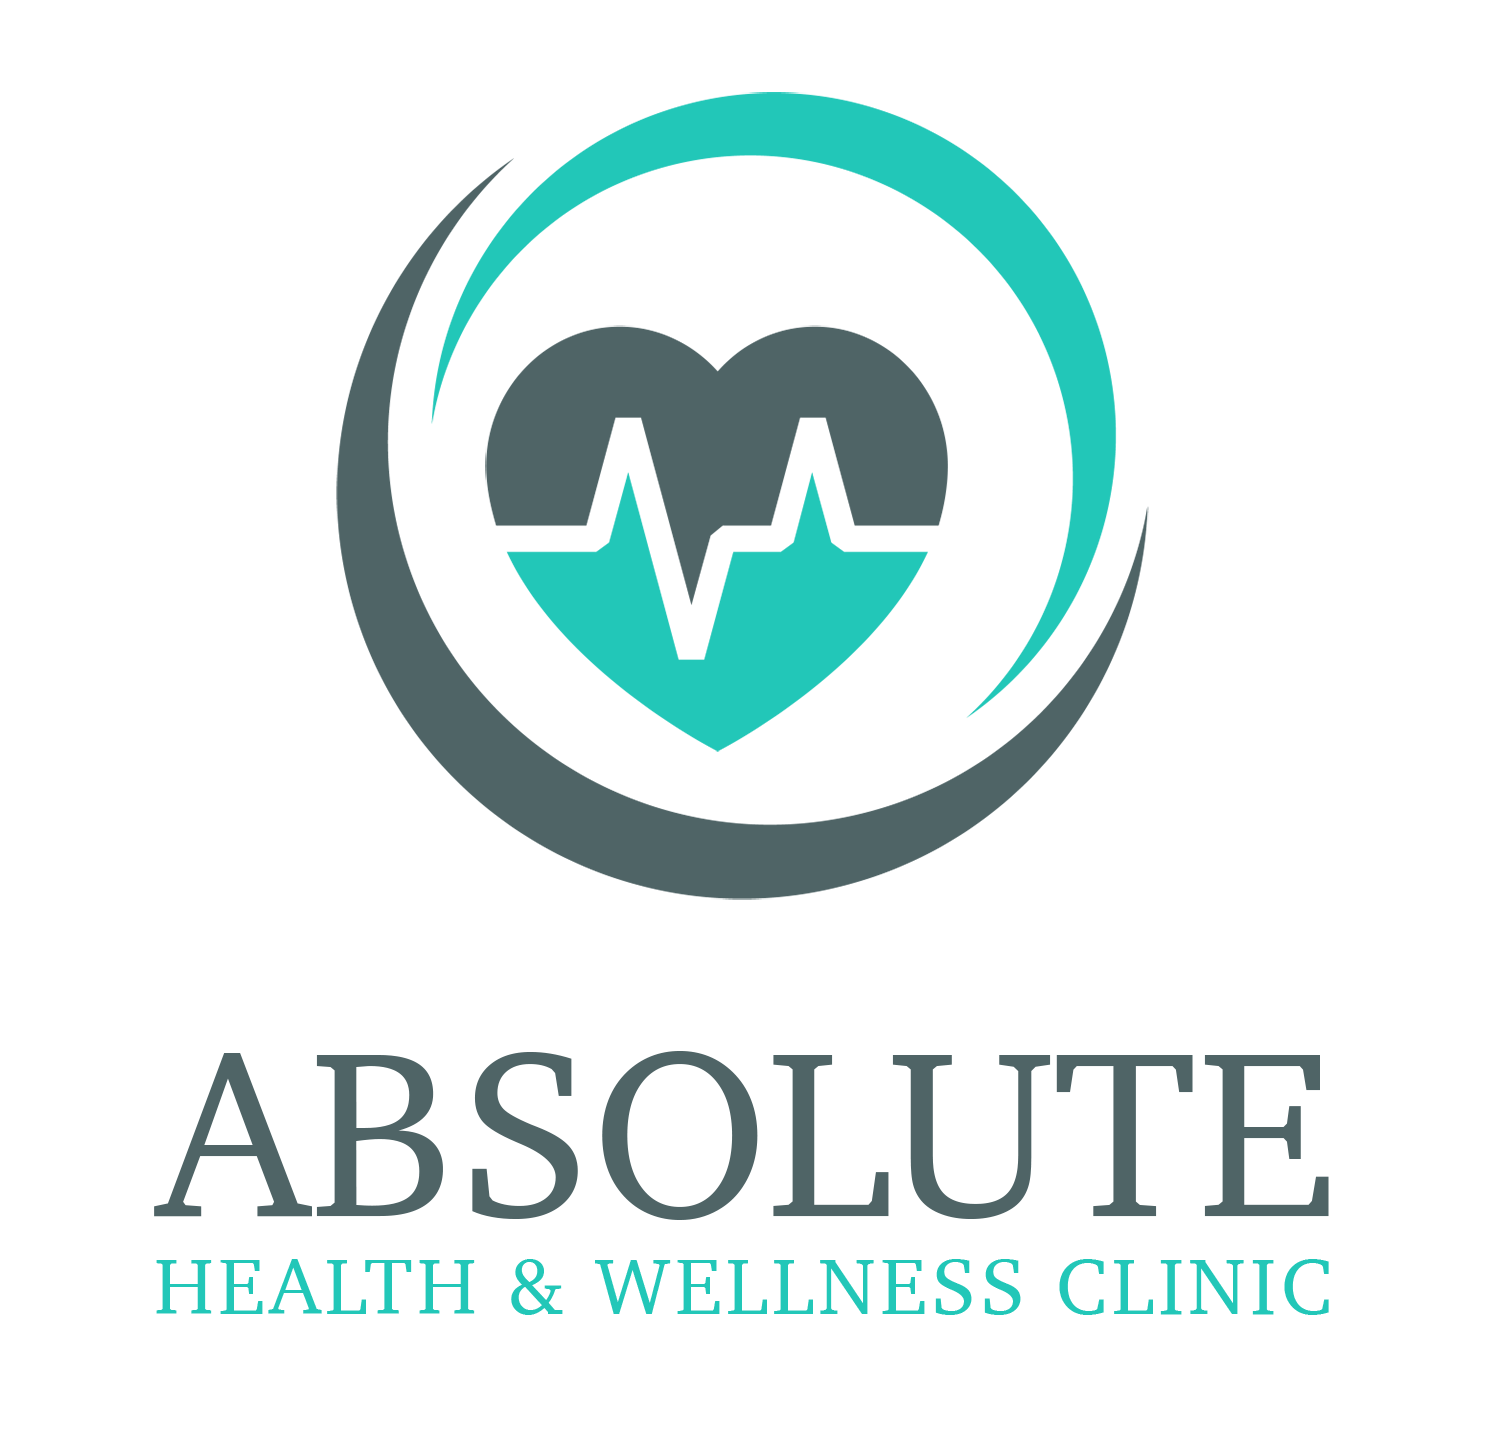 Absolute Health and Wellness